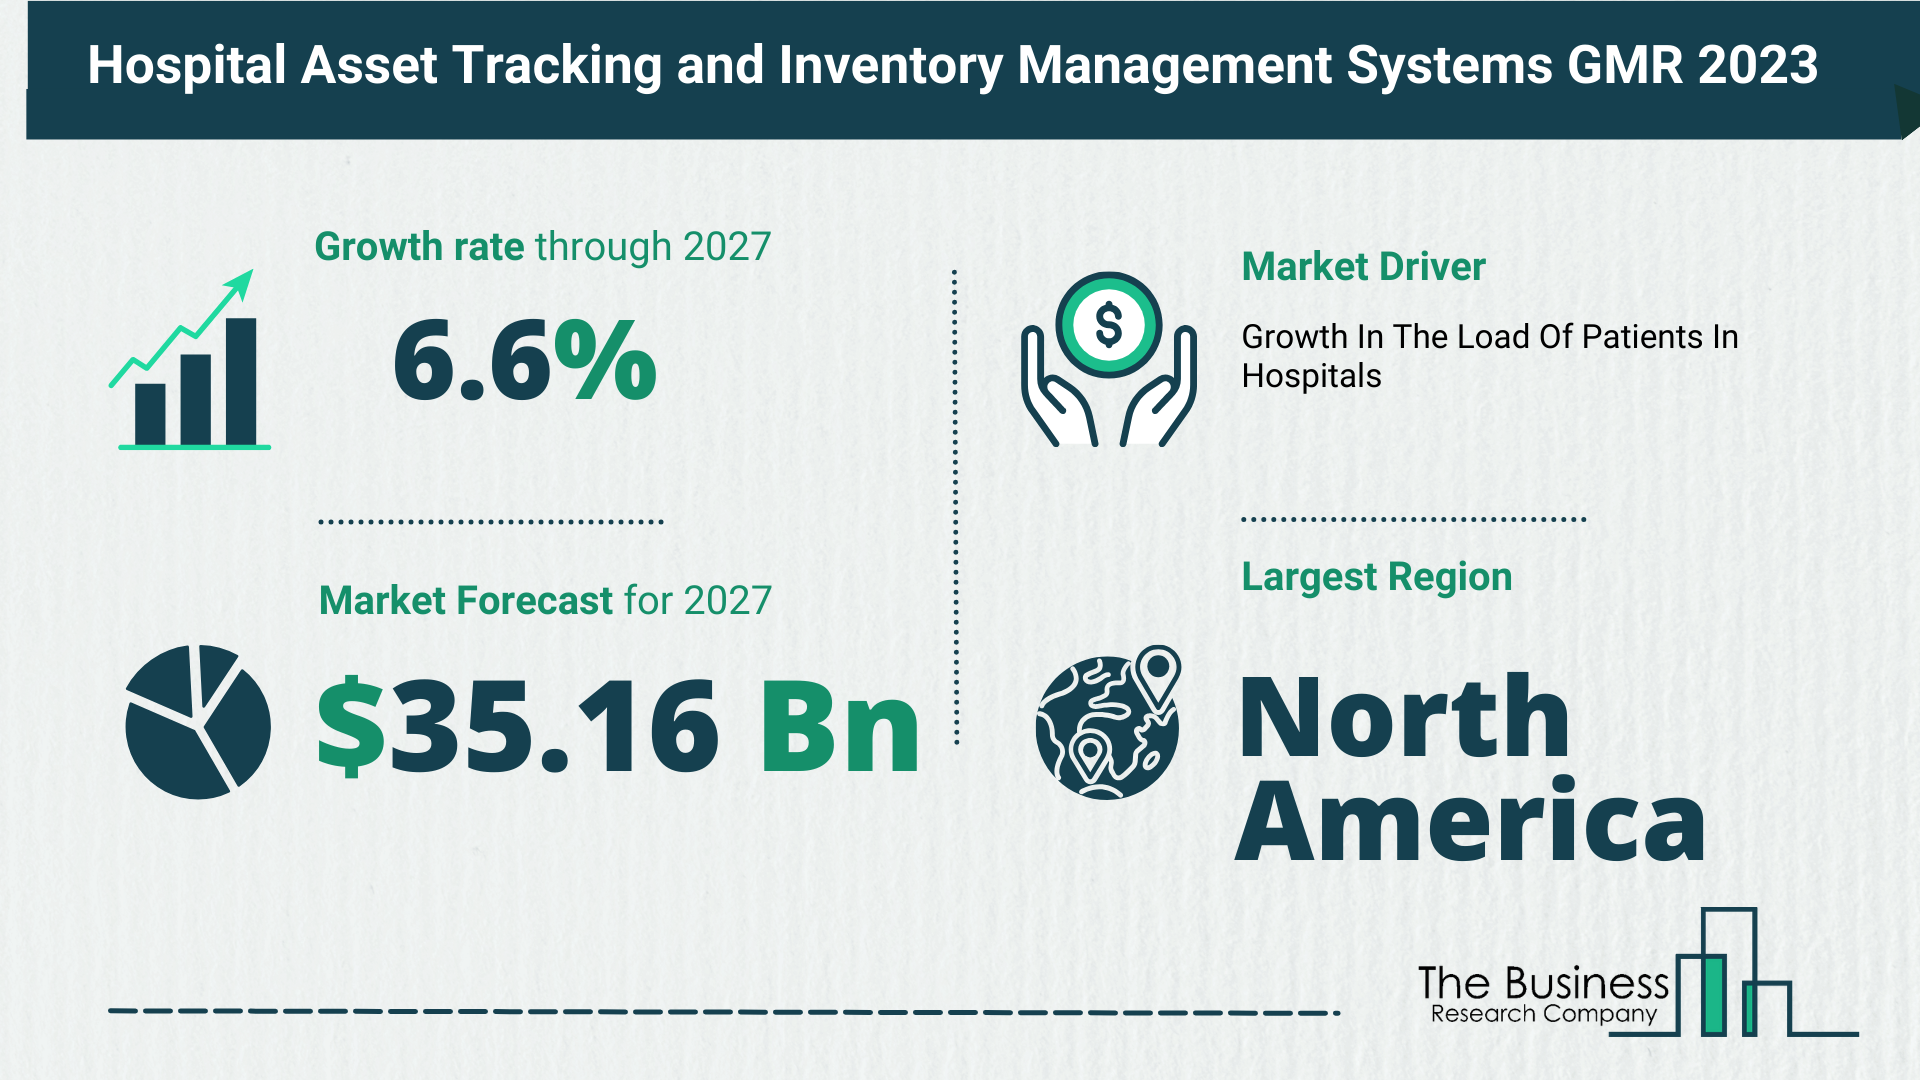 Global Hospital Asset Tracking and Inventory Management Systems Market